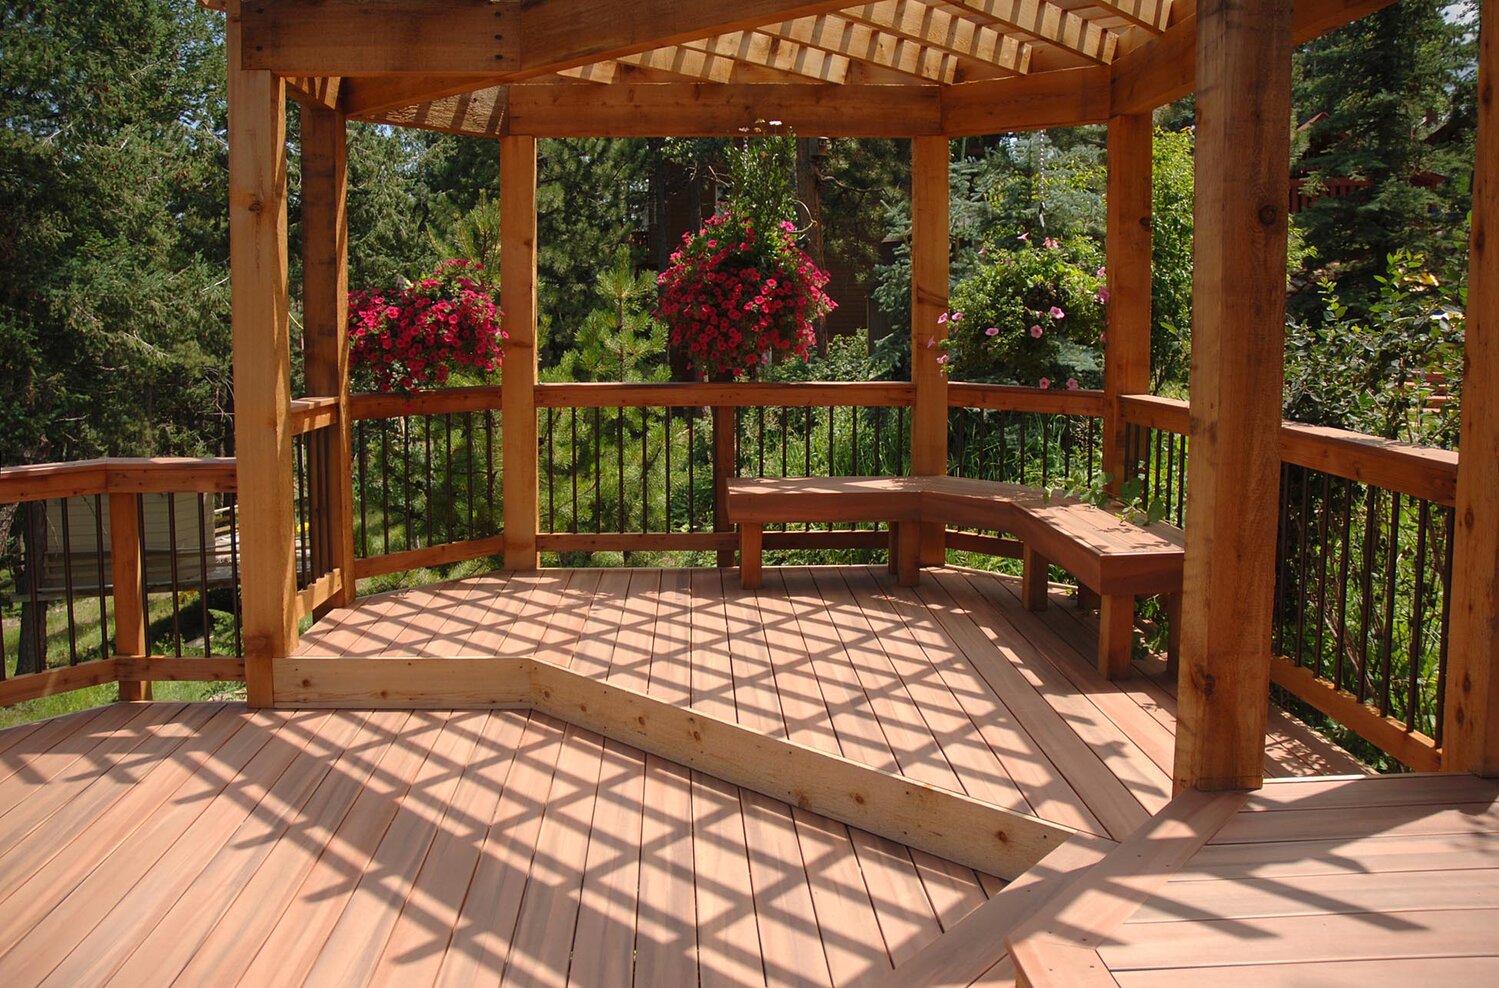 Multilevel decking and pergolas provide interest and shade to your backyard. Pictured is Fiberon Tropics composite decking in Jatoba from flickr.com. Link to license: creativecommons.org/licenses/by-nd/2.0.